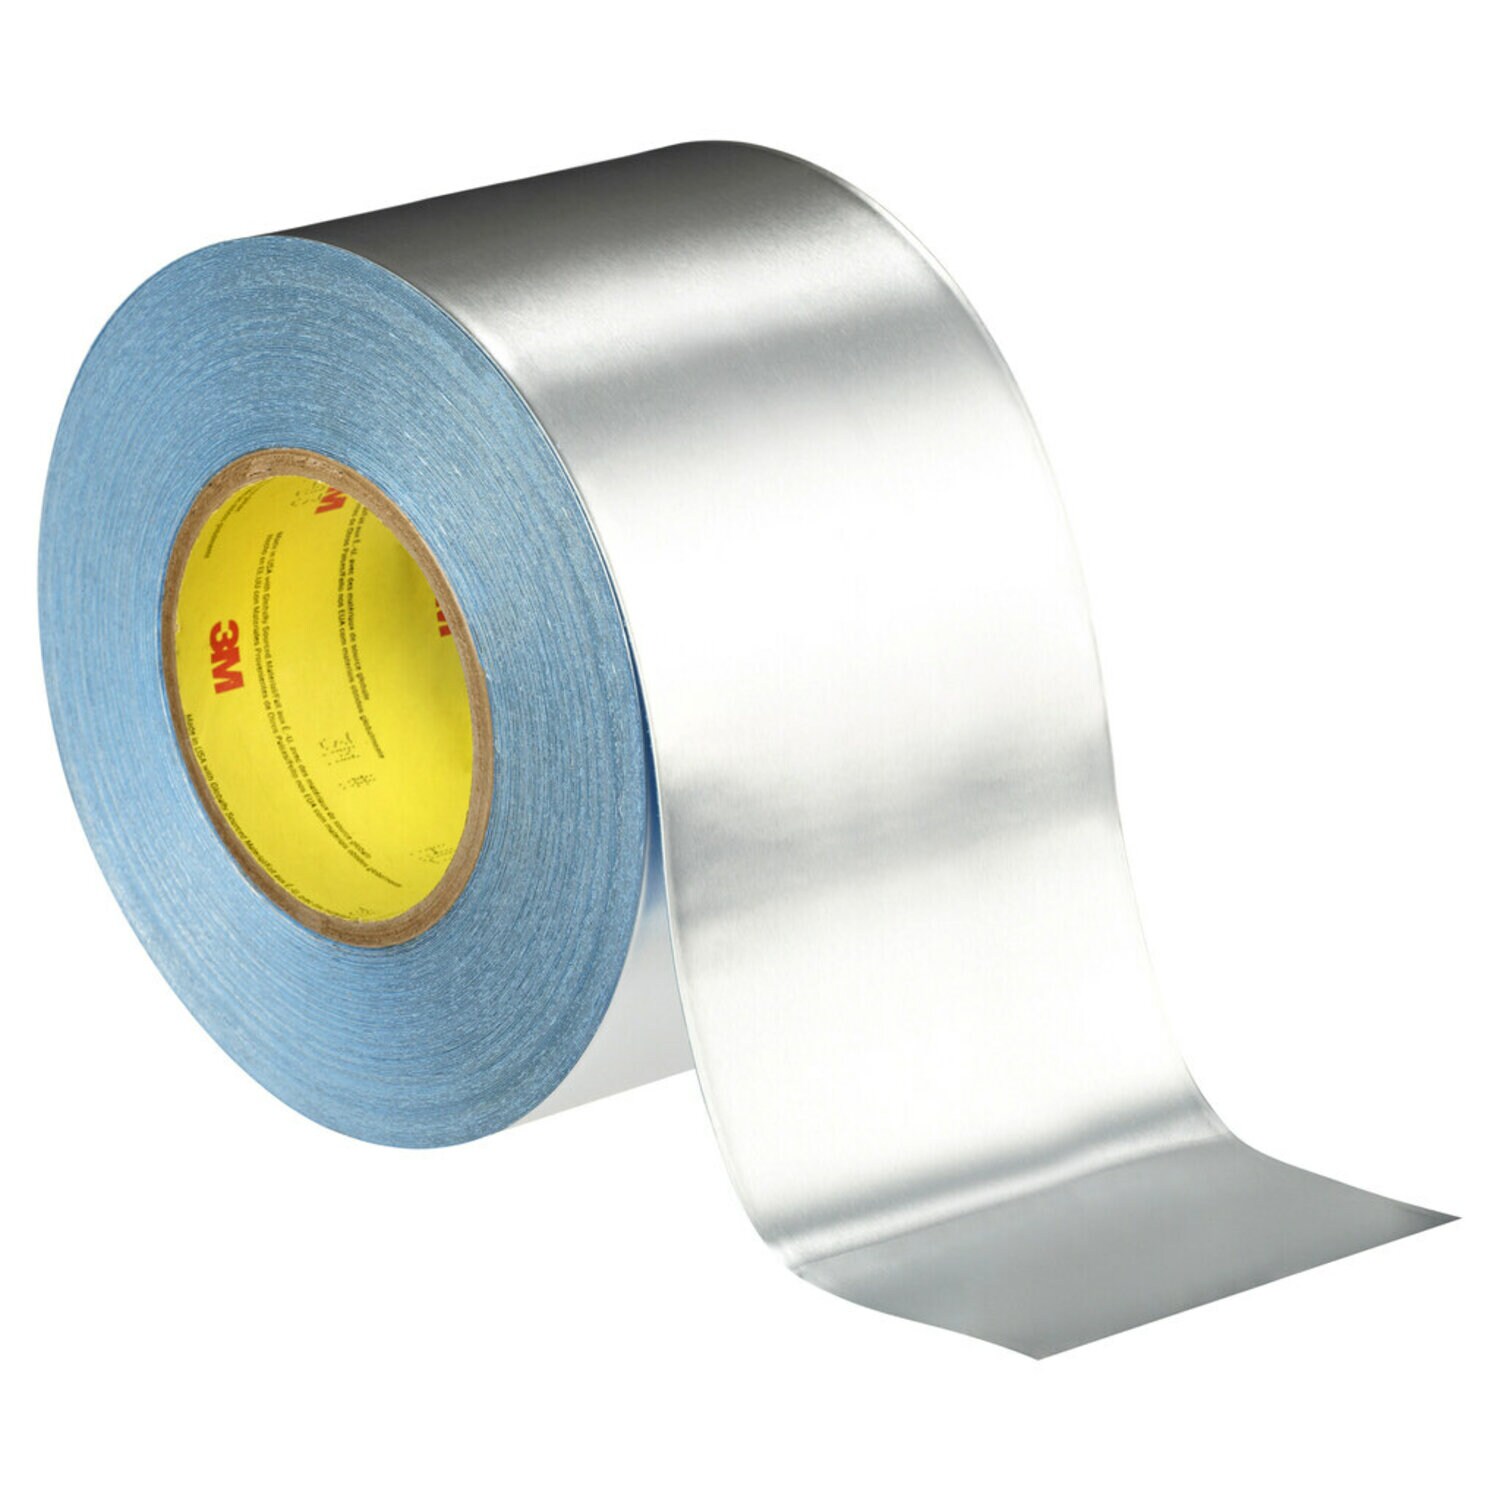 7000049123 - 3M Vibration Damping Tape 435, Silver, 3 in x 36 yd, 13.5 mil, 12 rolls
per case